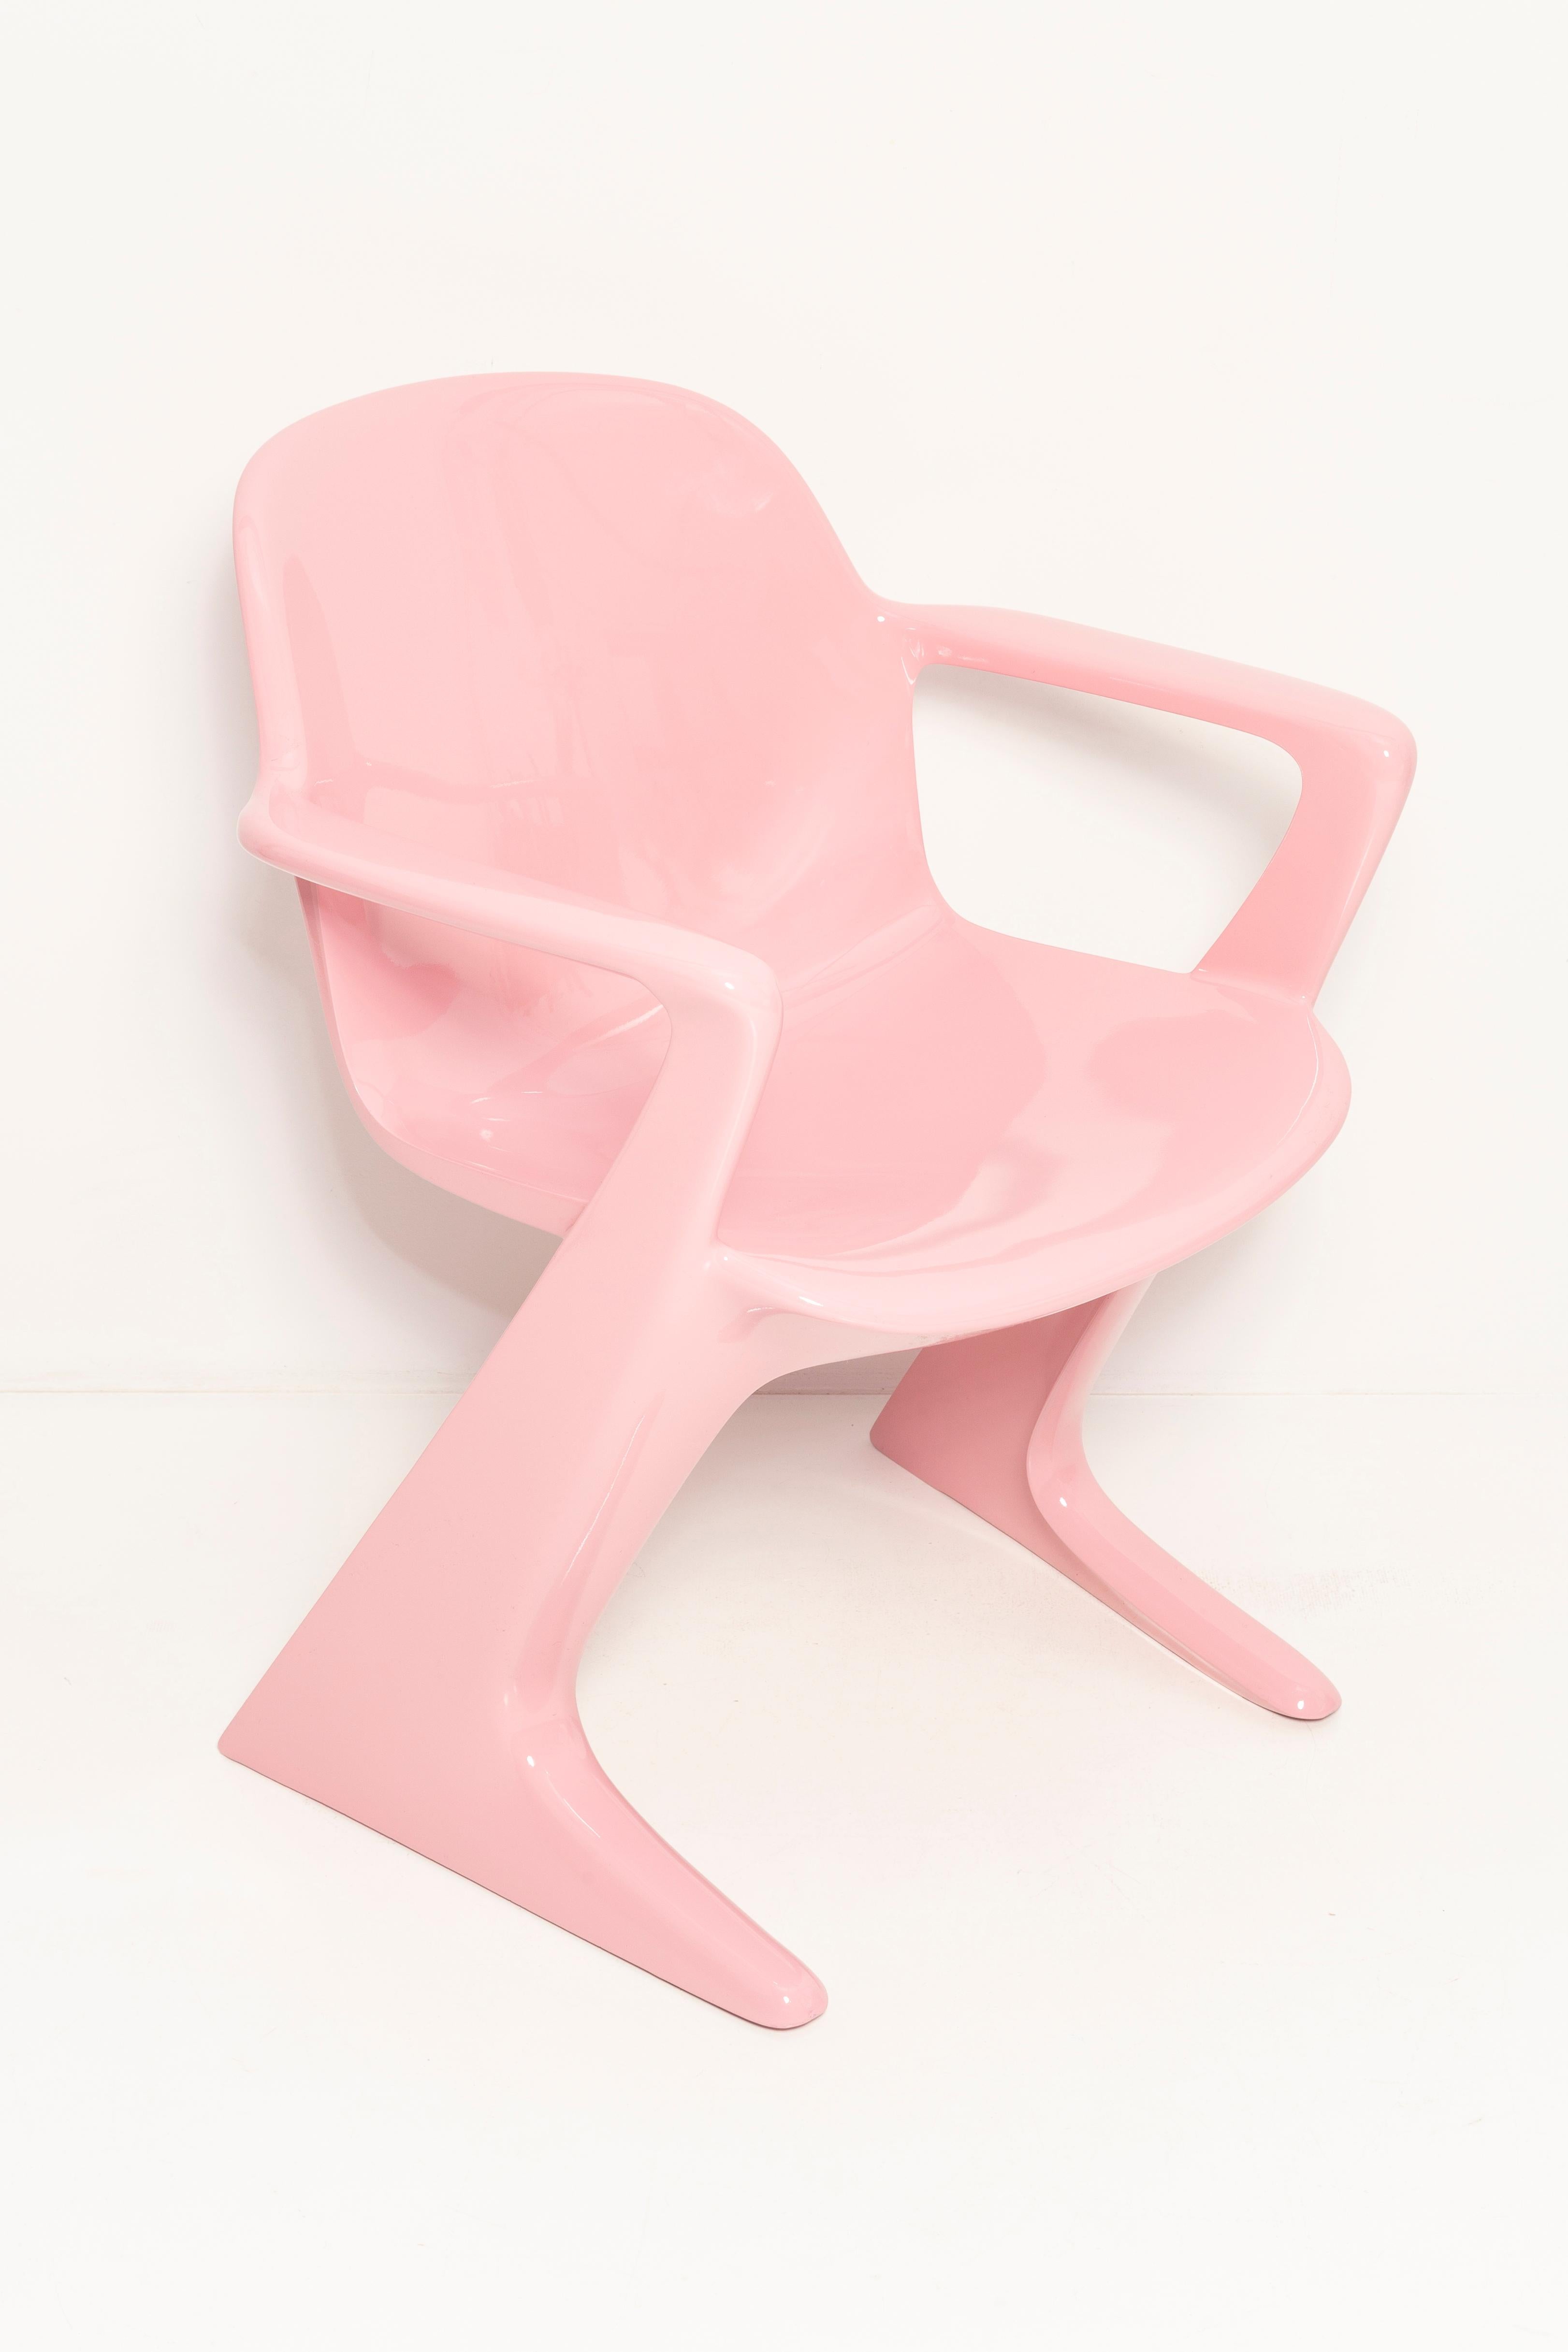 20th Century Set of Six Midcentury Pink Kangaroo Chairs, Ernst Moeckl, Germany, 1960s For Sale